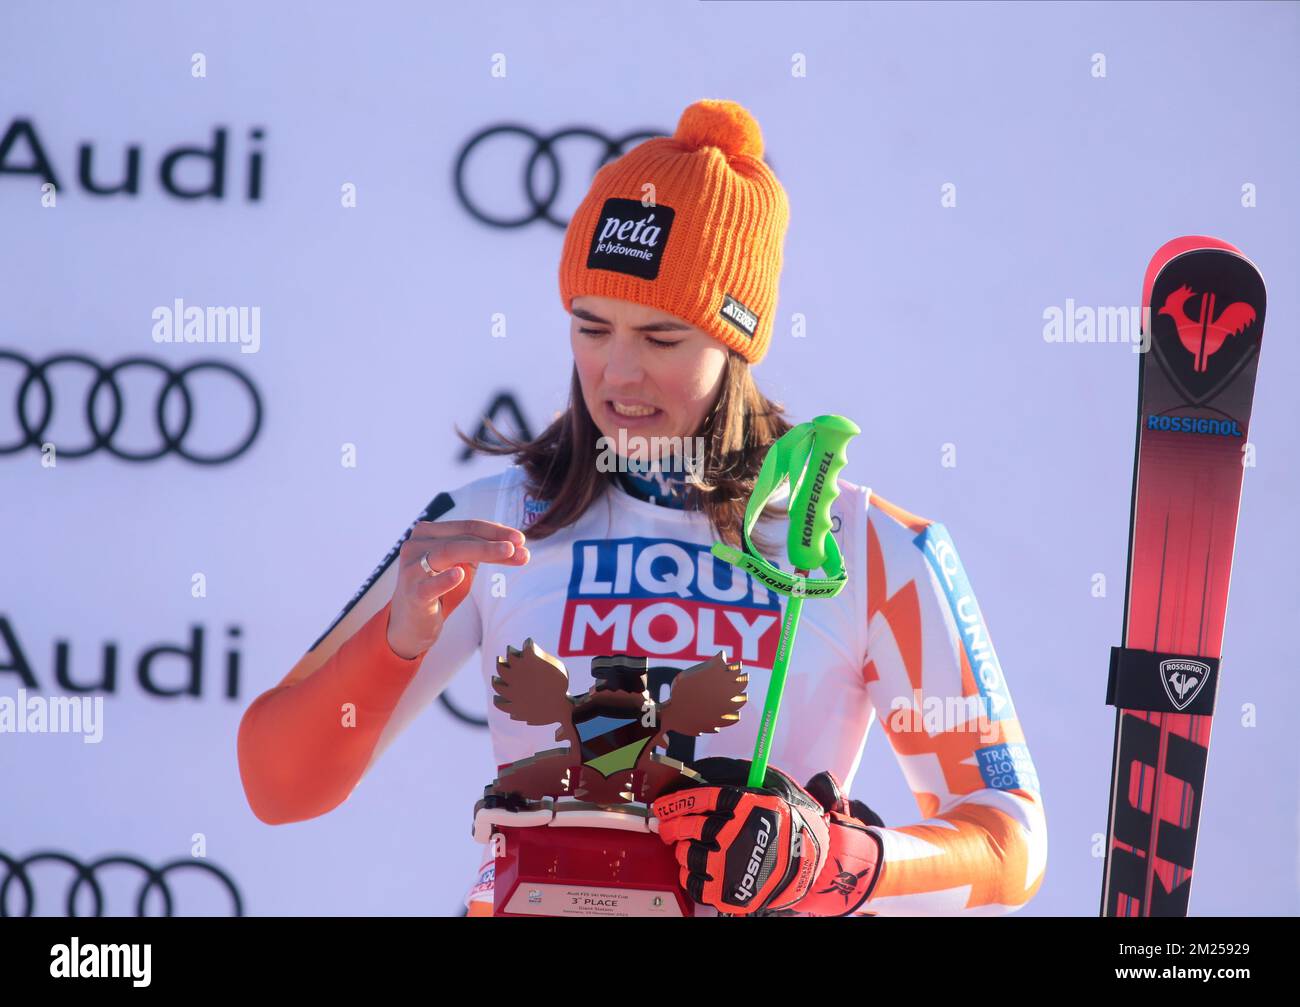 Audi Fis World Cup Sestriere, Italy, 10-11 December 2022 Stock Photo